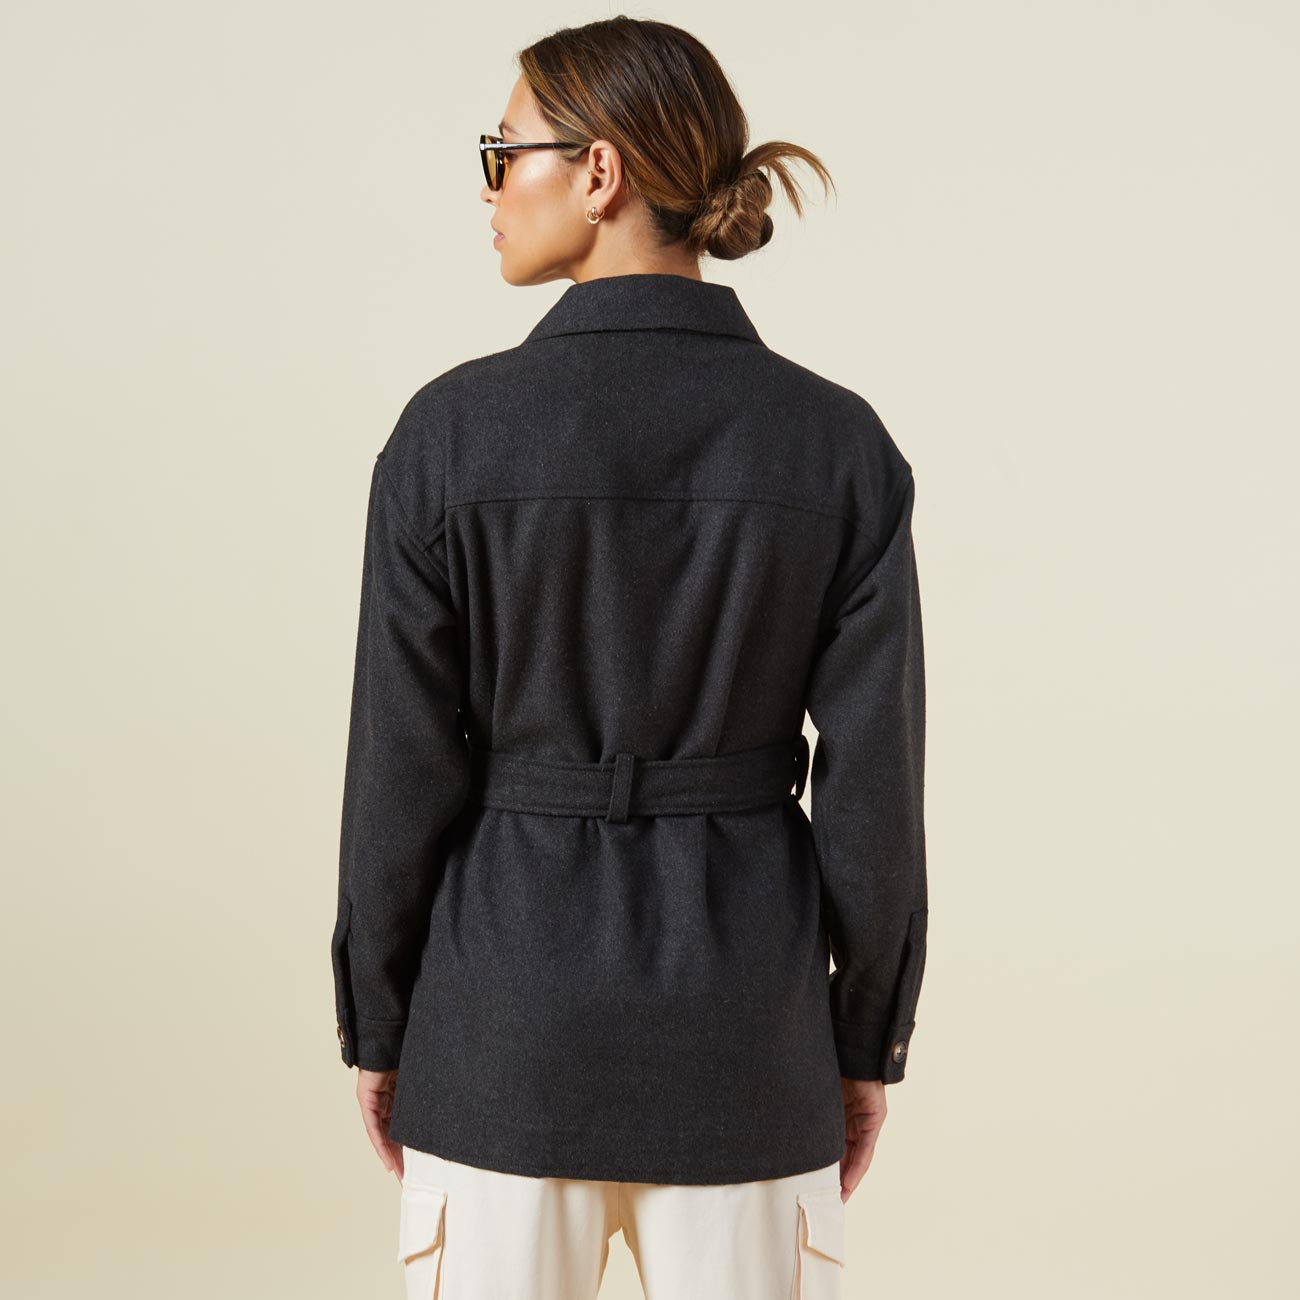 Back view of model wearing the safari jacket in charcoal.